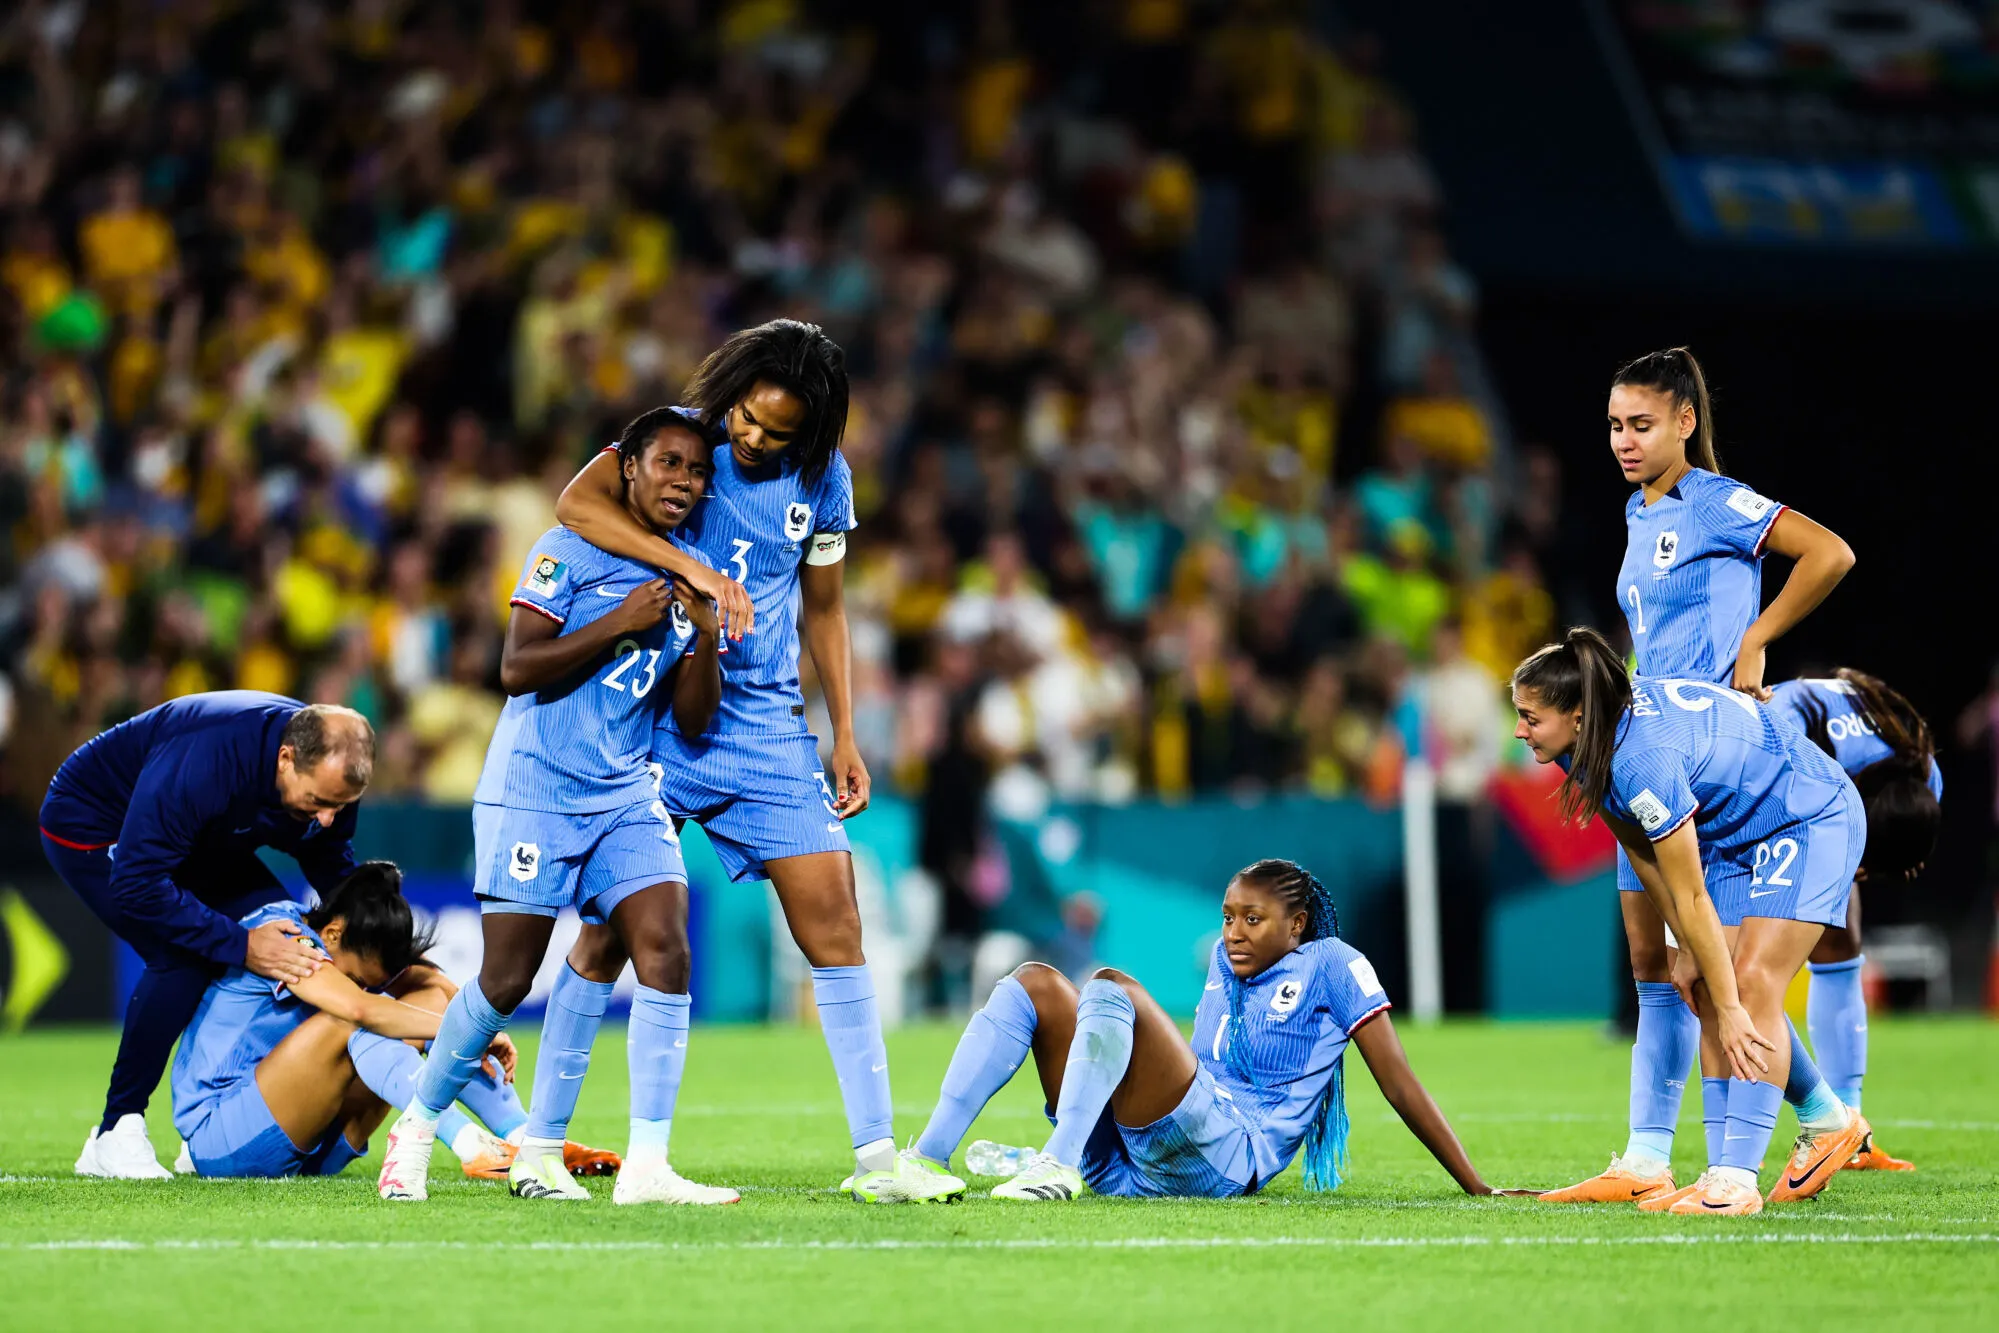 Wendie RENARD, Vicky BECHO, Kadidiatou DIANI, Maelle LAKRAR of France during the Quarter Final match between Australie and France at the 2023 FIFA Women's World Cup on August 12, 2023 in Brisbane, Australia. (Photo by Kev Nagle/Icon Sport)